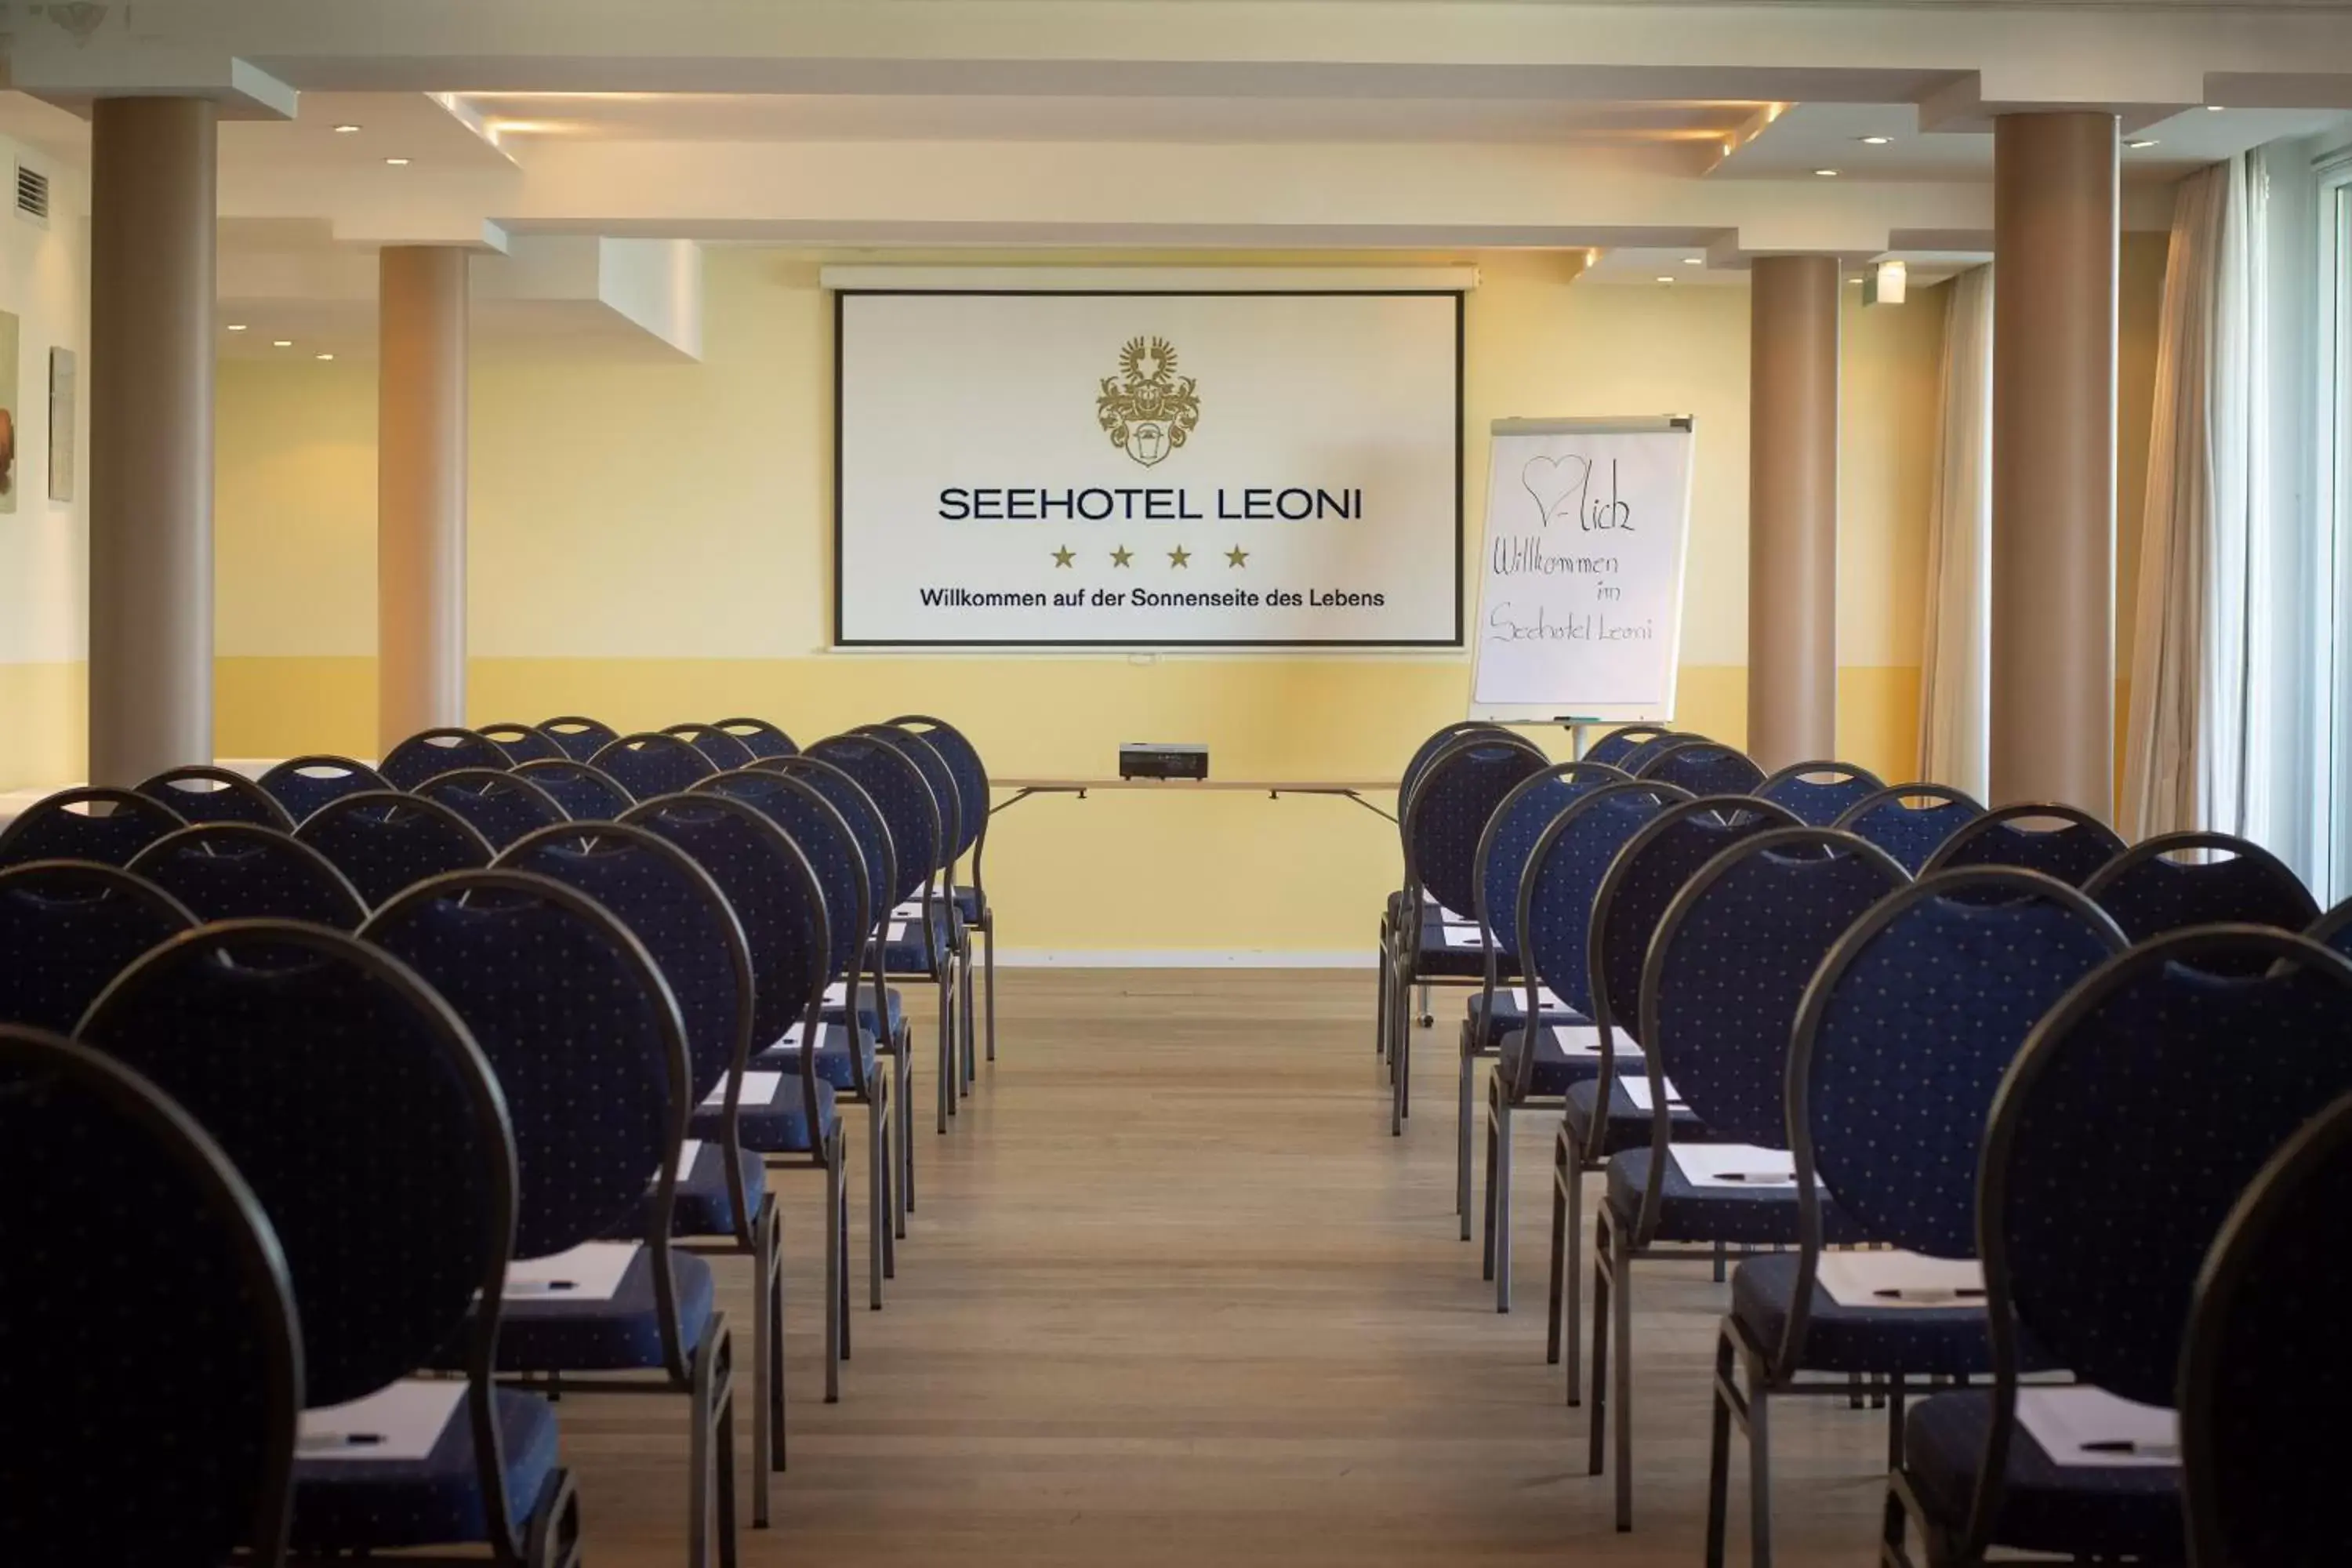 Meeting/conference room in Seehotel Leoni